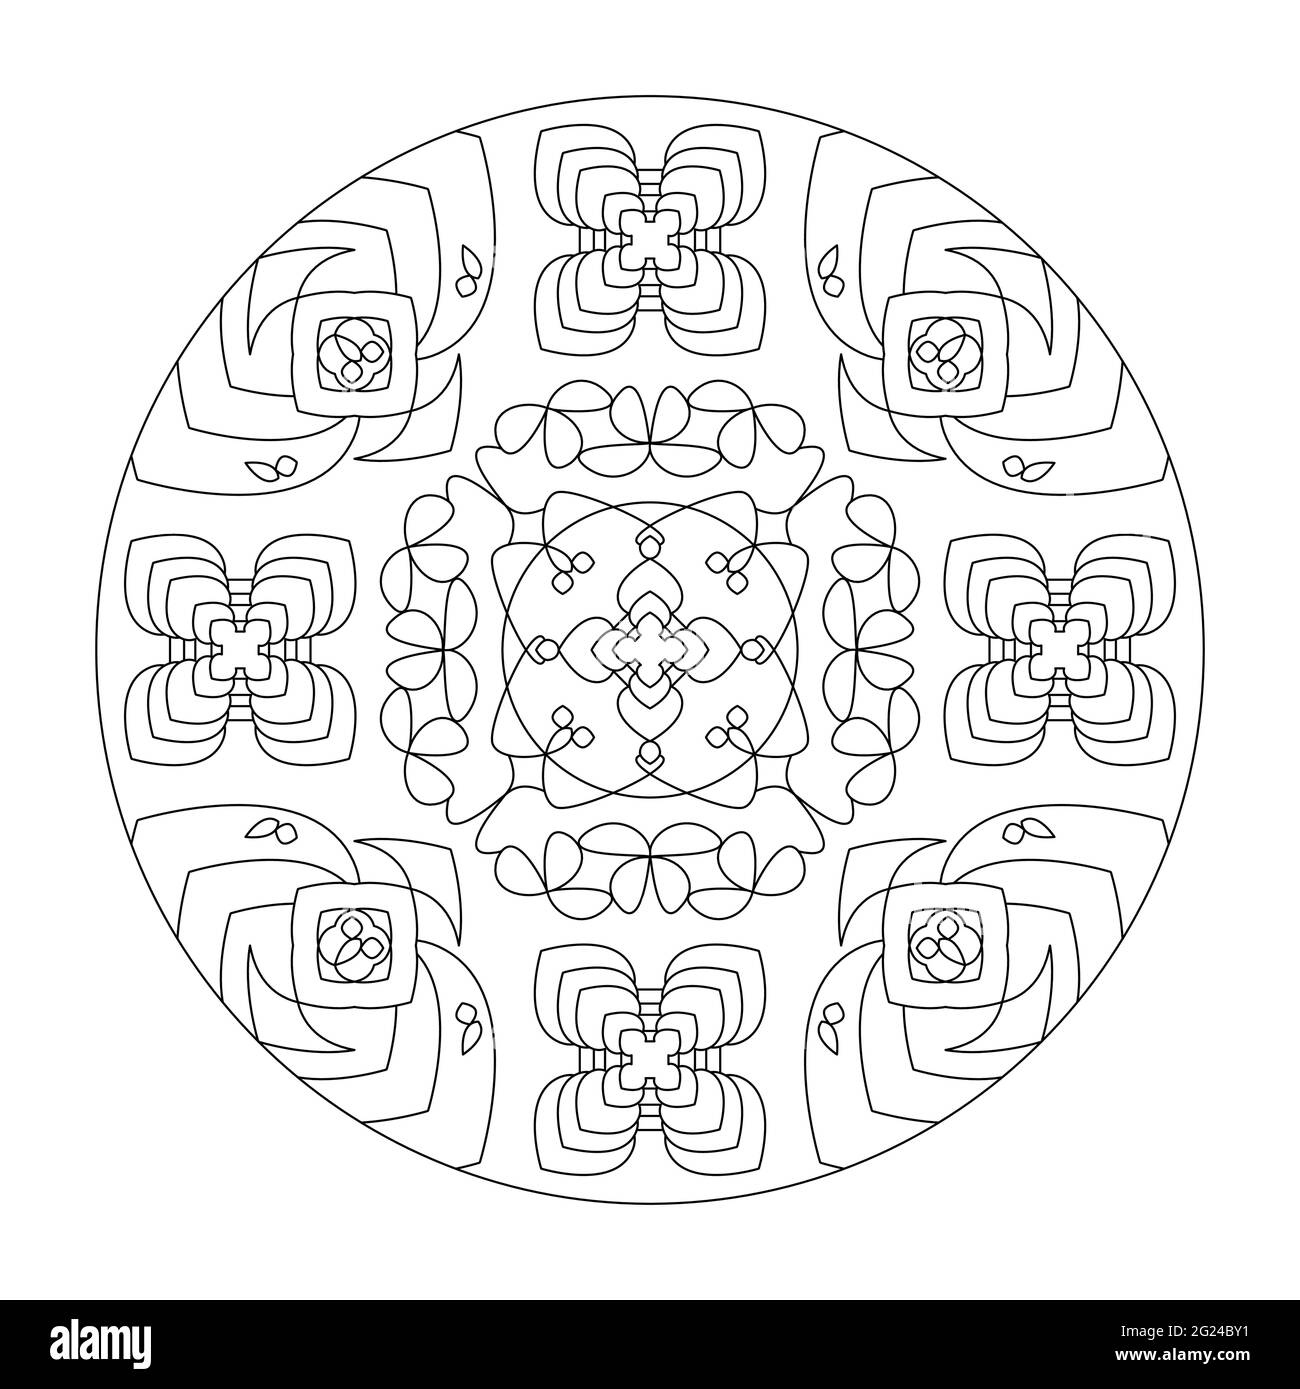 Mandala coloring page. Abstract. Art Therapy. Anti-stress. Vector illustration black and white. Stock Vector